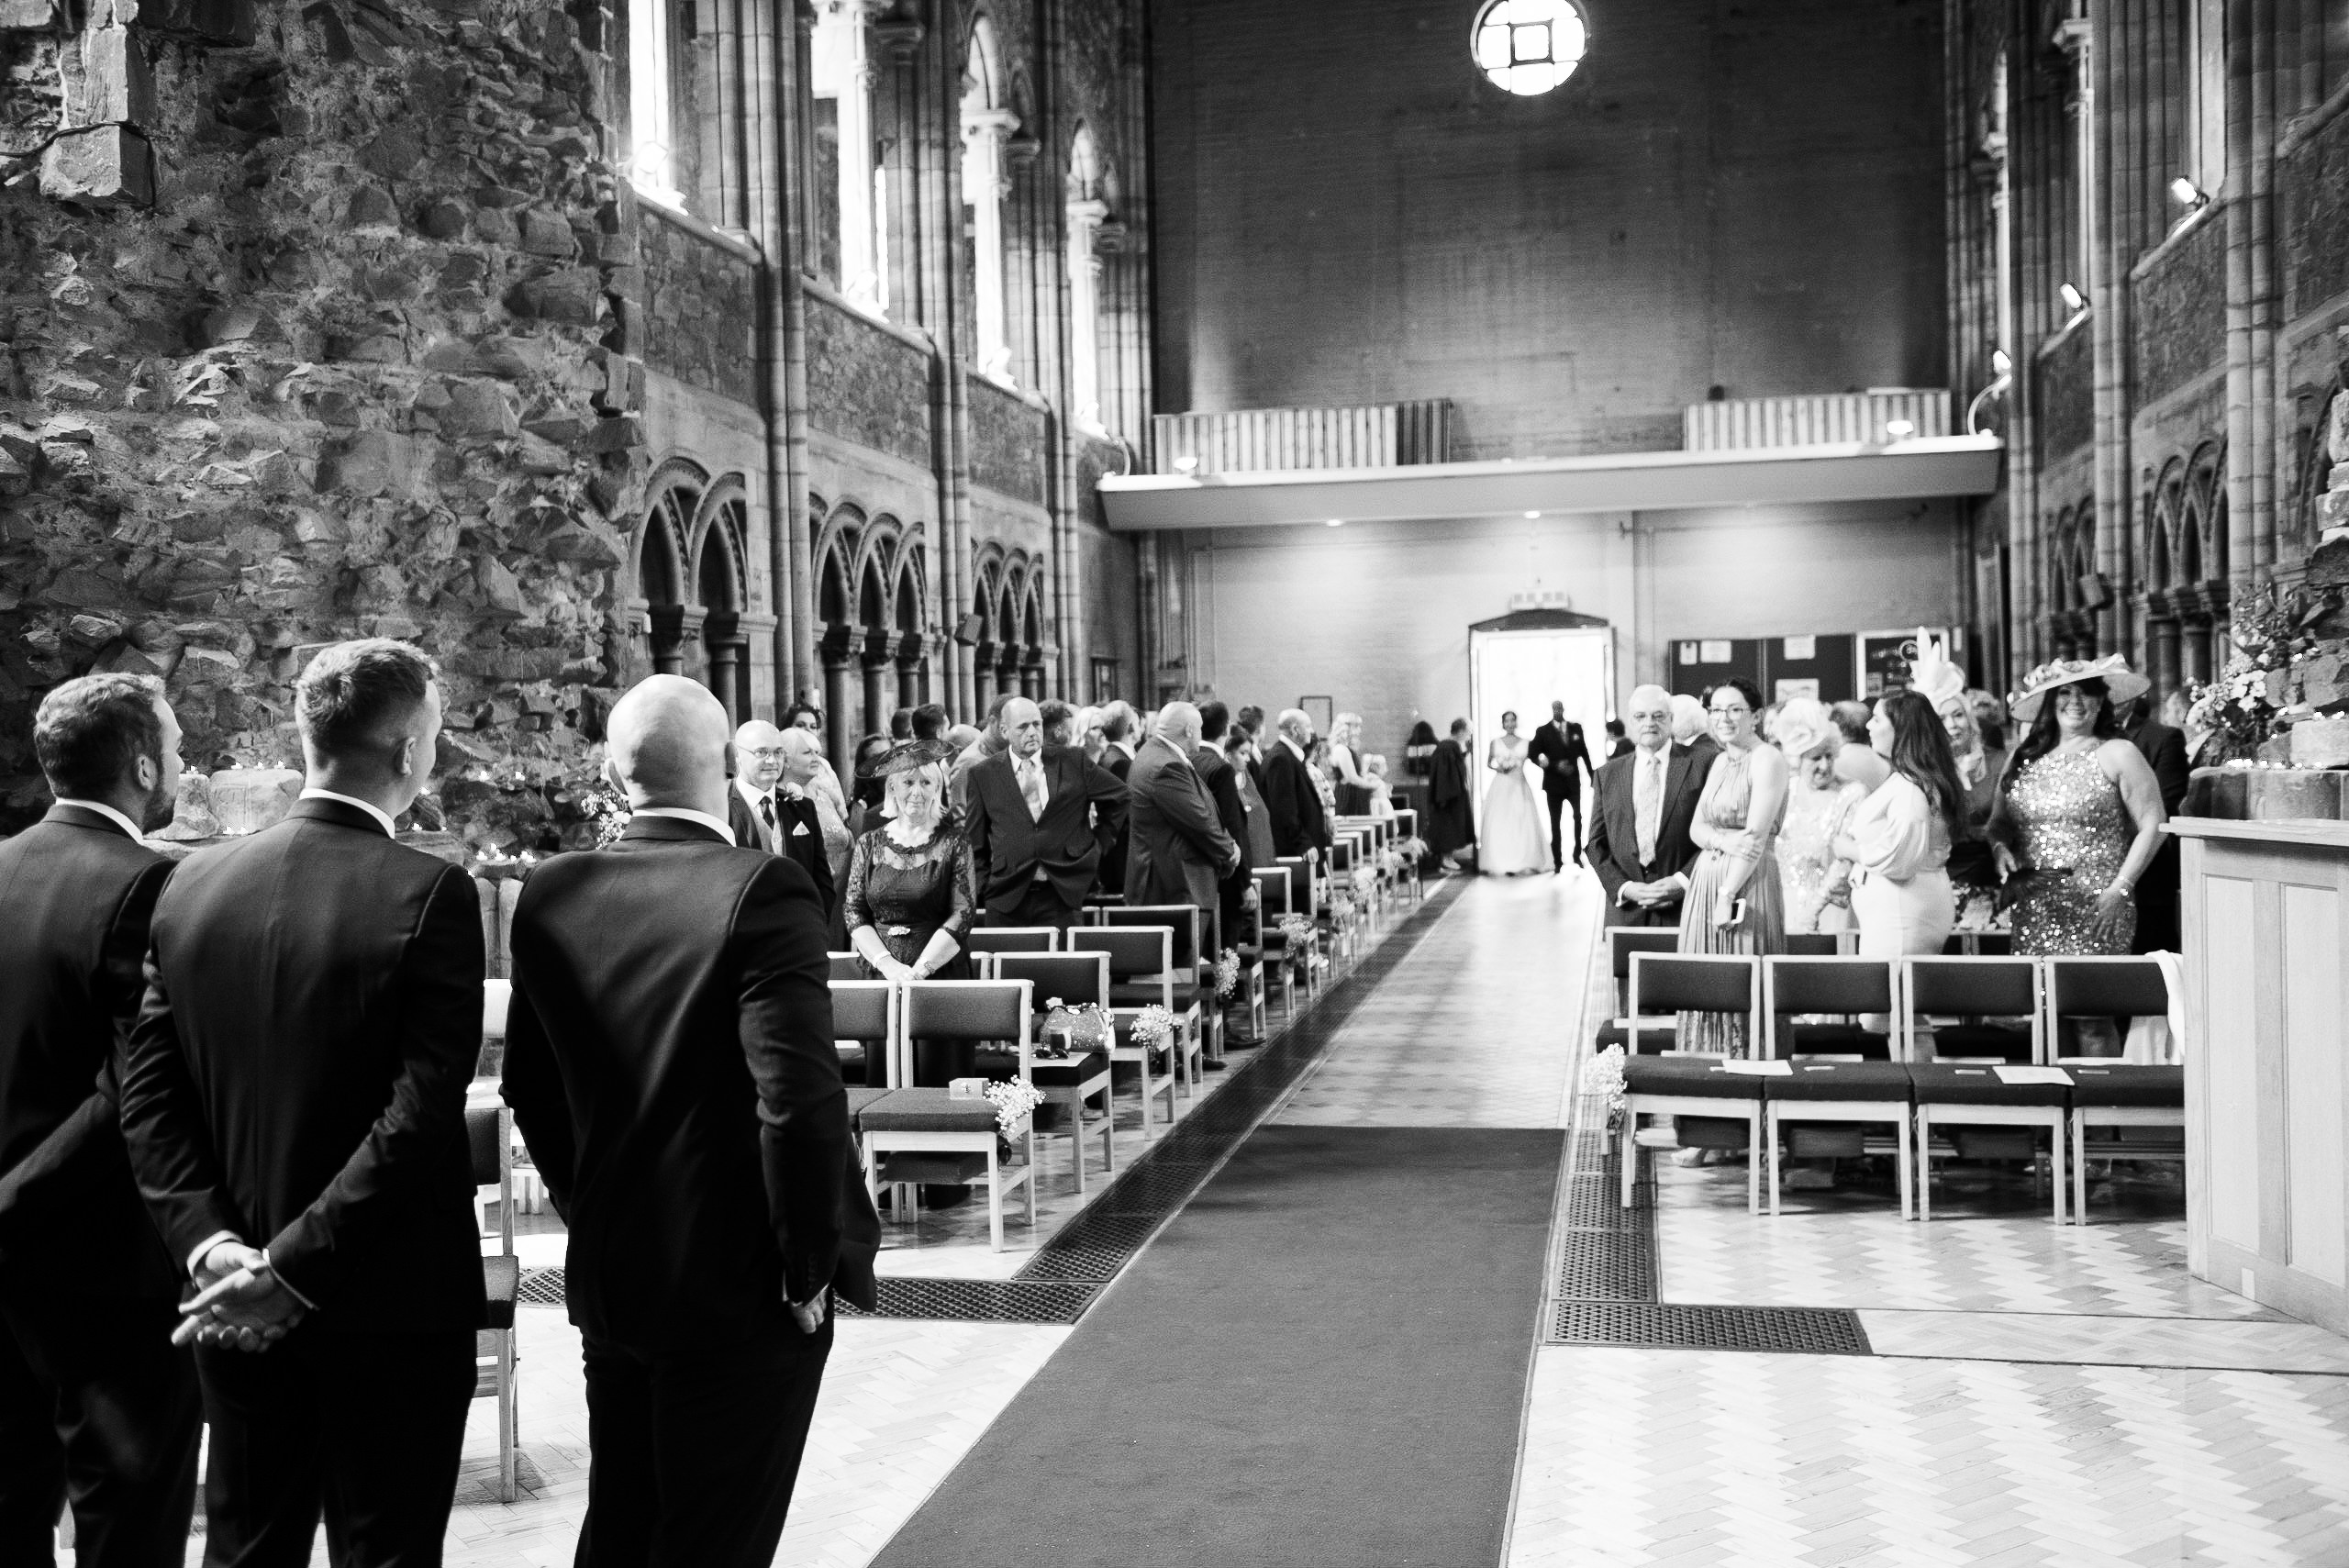 Ceremony pictures at St Marys Church Nuneaton